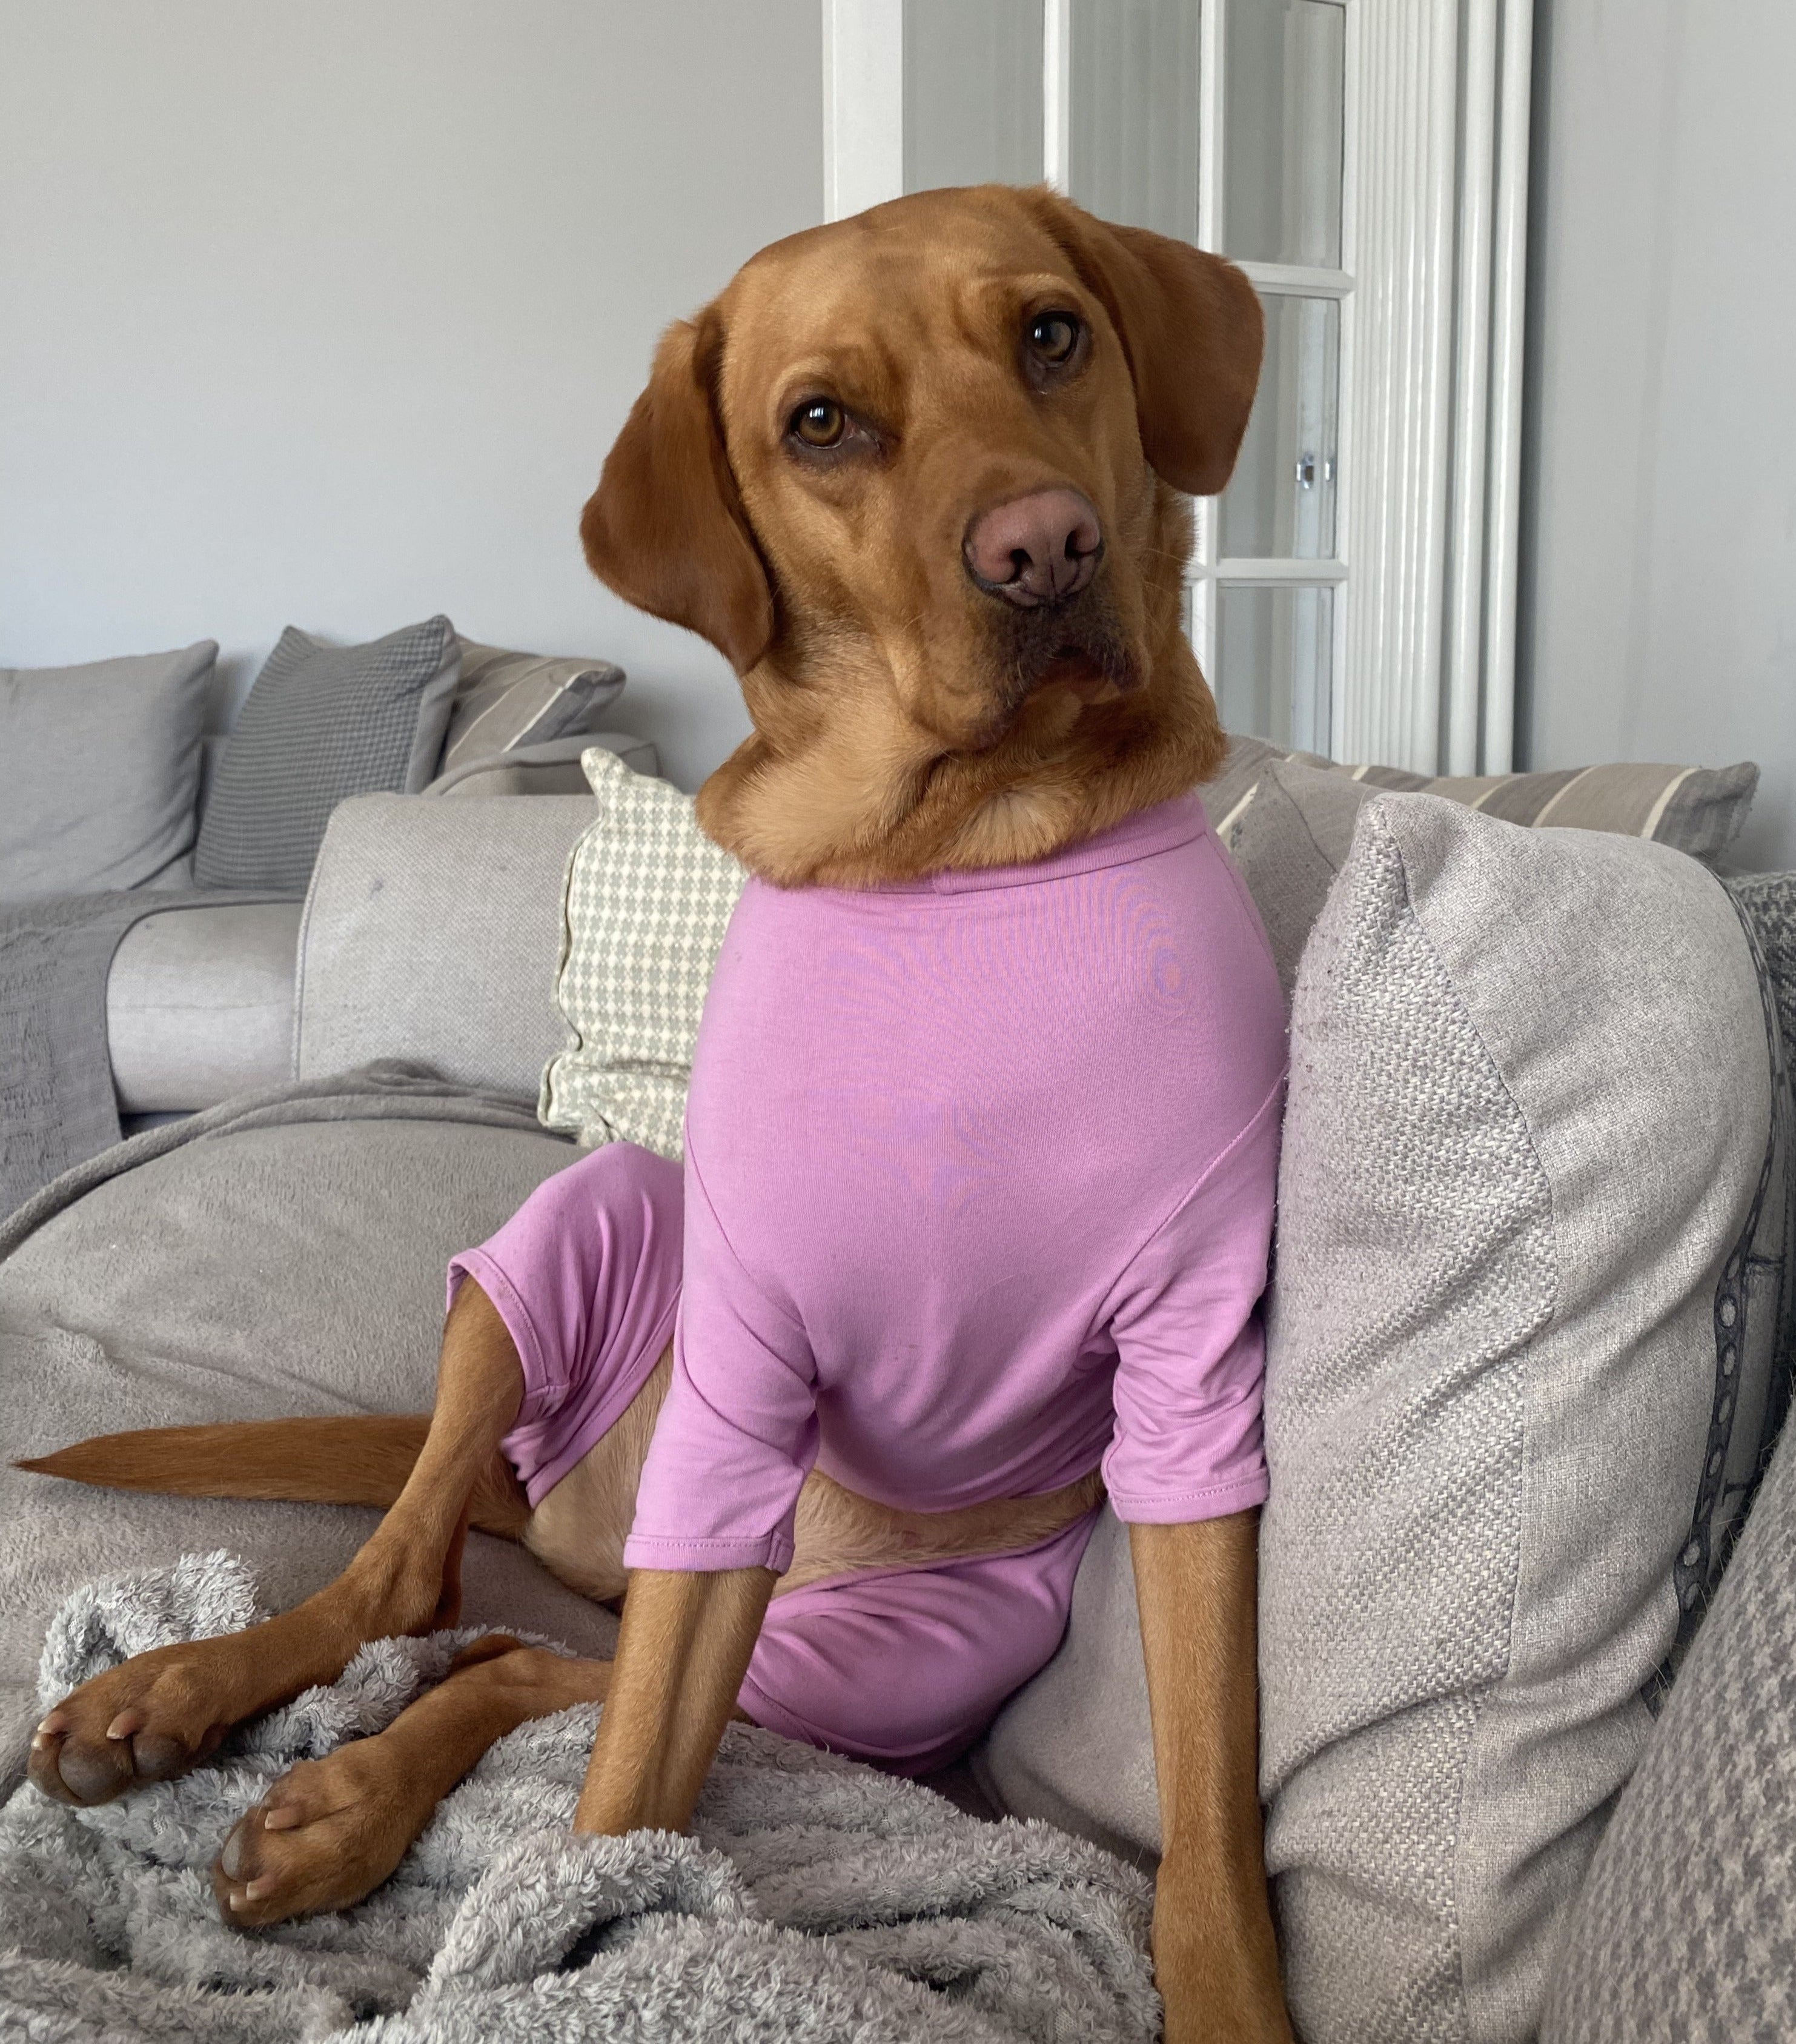 Cotton dog t-shirt suit in Dusky Rose, dog recovery suit